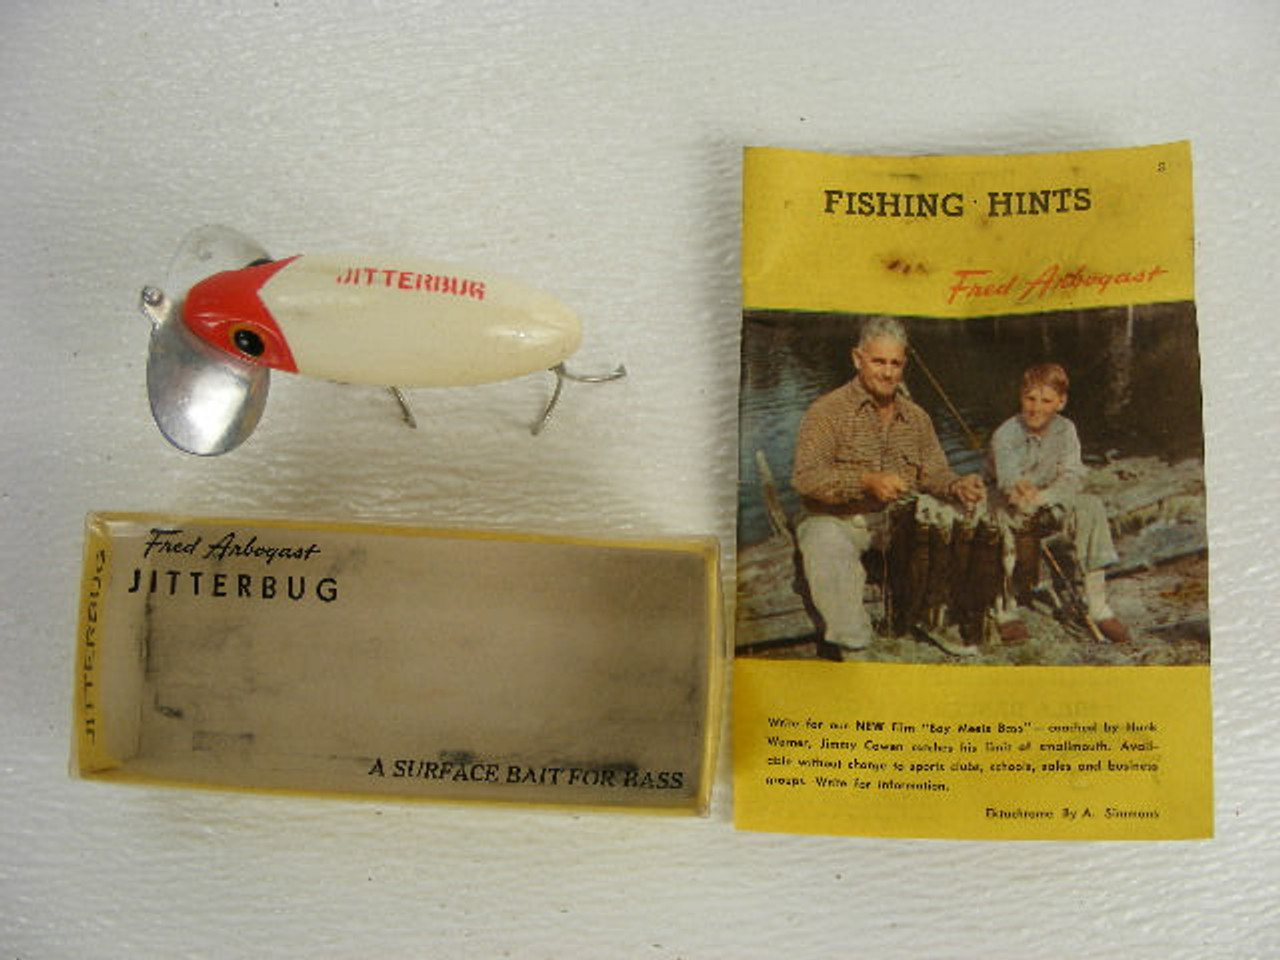 A vintage Fred Arbogast Jitterbug fishing lure with the original box and  fishing hints paper. - Antique Mystique